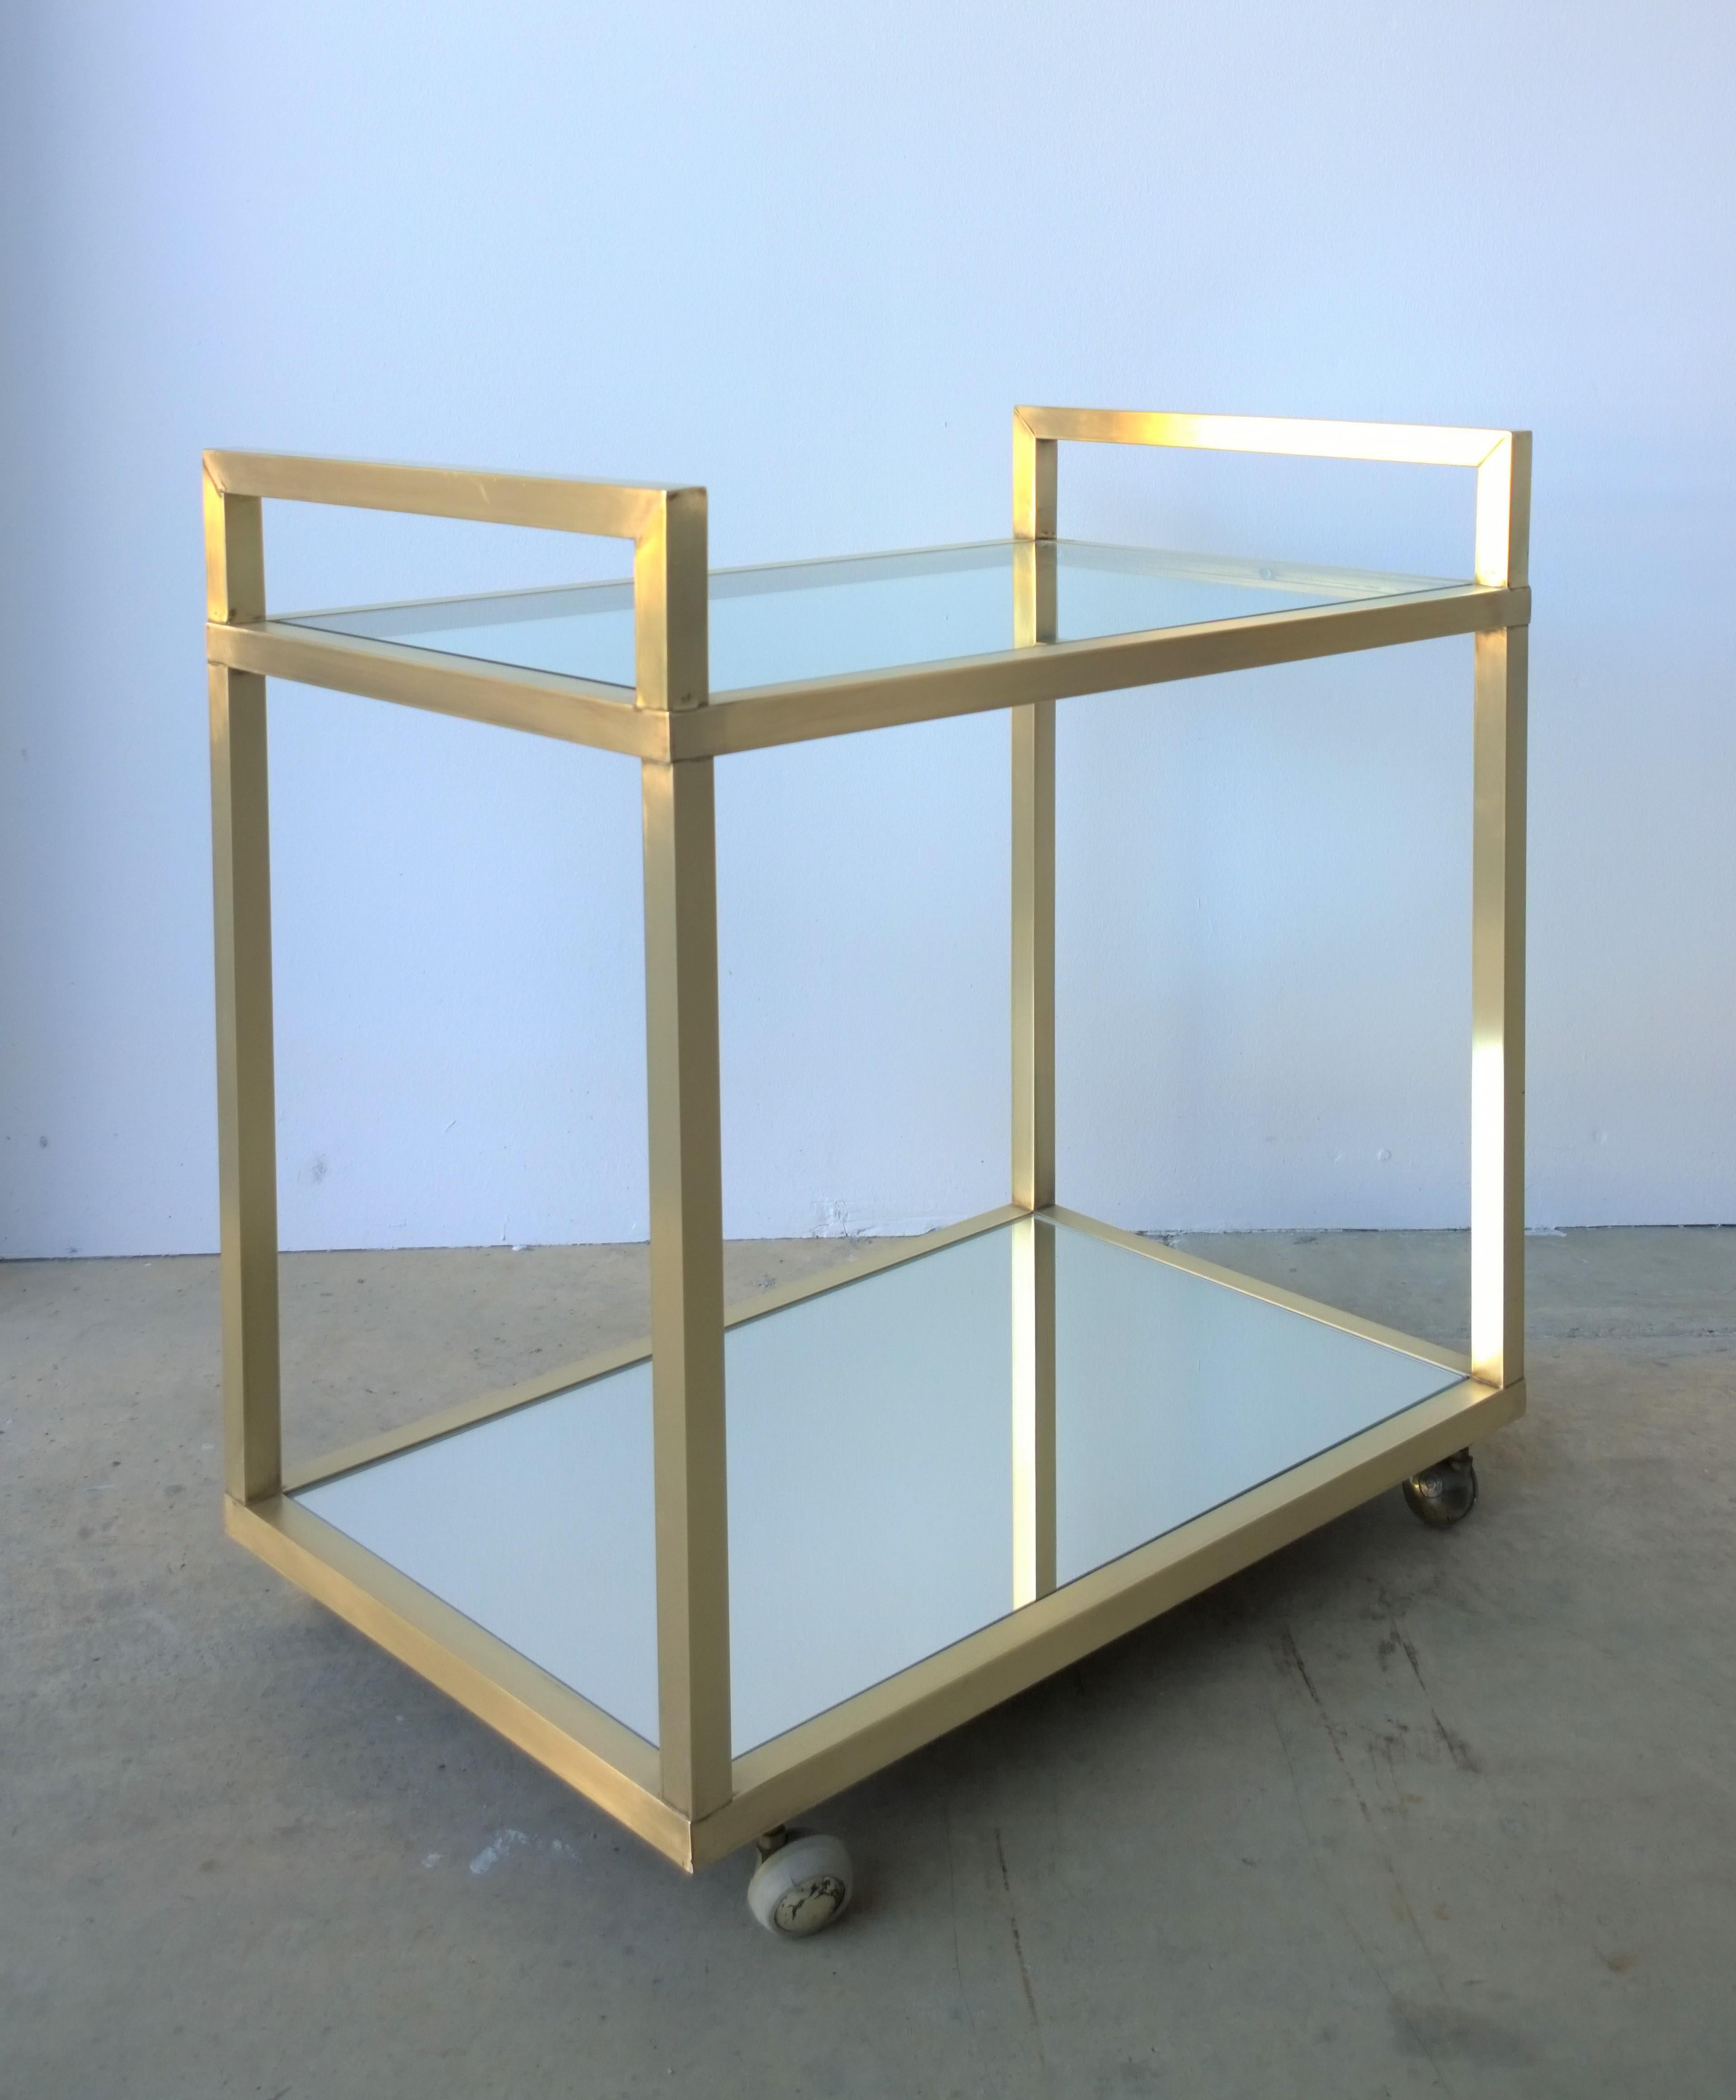 Offered is a Mid-Century Modern Italian brass with glass and mirrored glass two-tier bar cart with original brass and new upgrade casters. The mirror shelf on the bar cart has been replaced. The brass has been newly polished to a bright golden